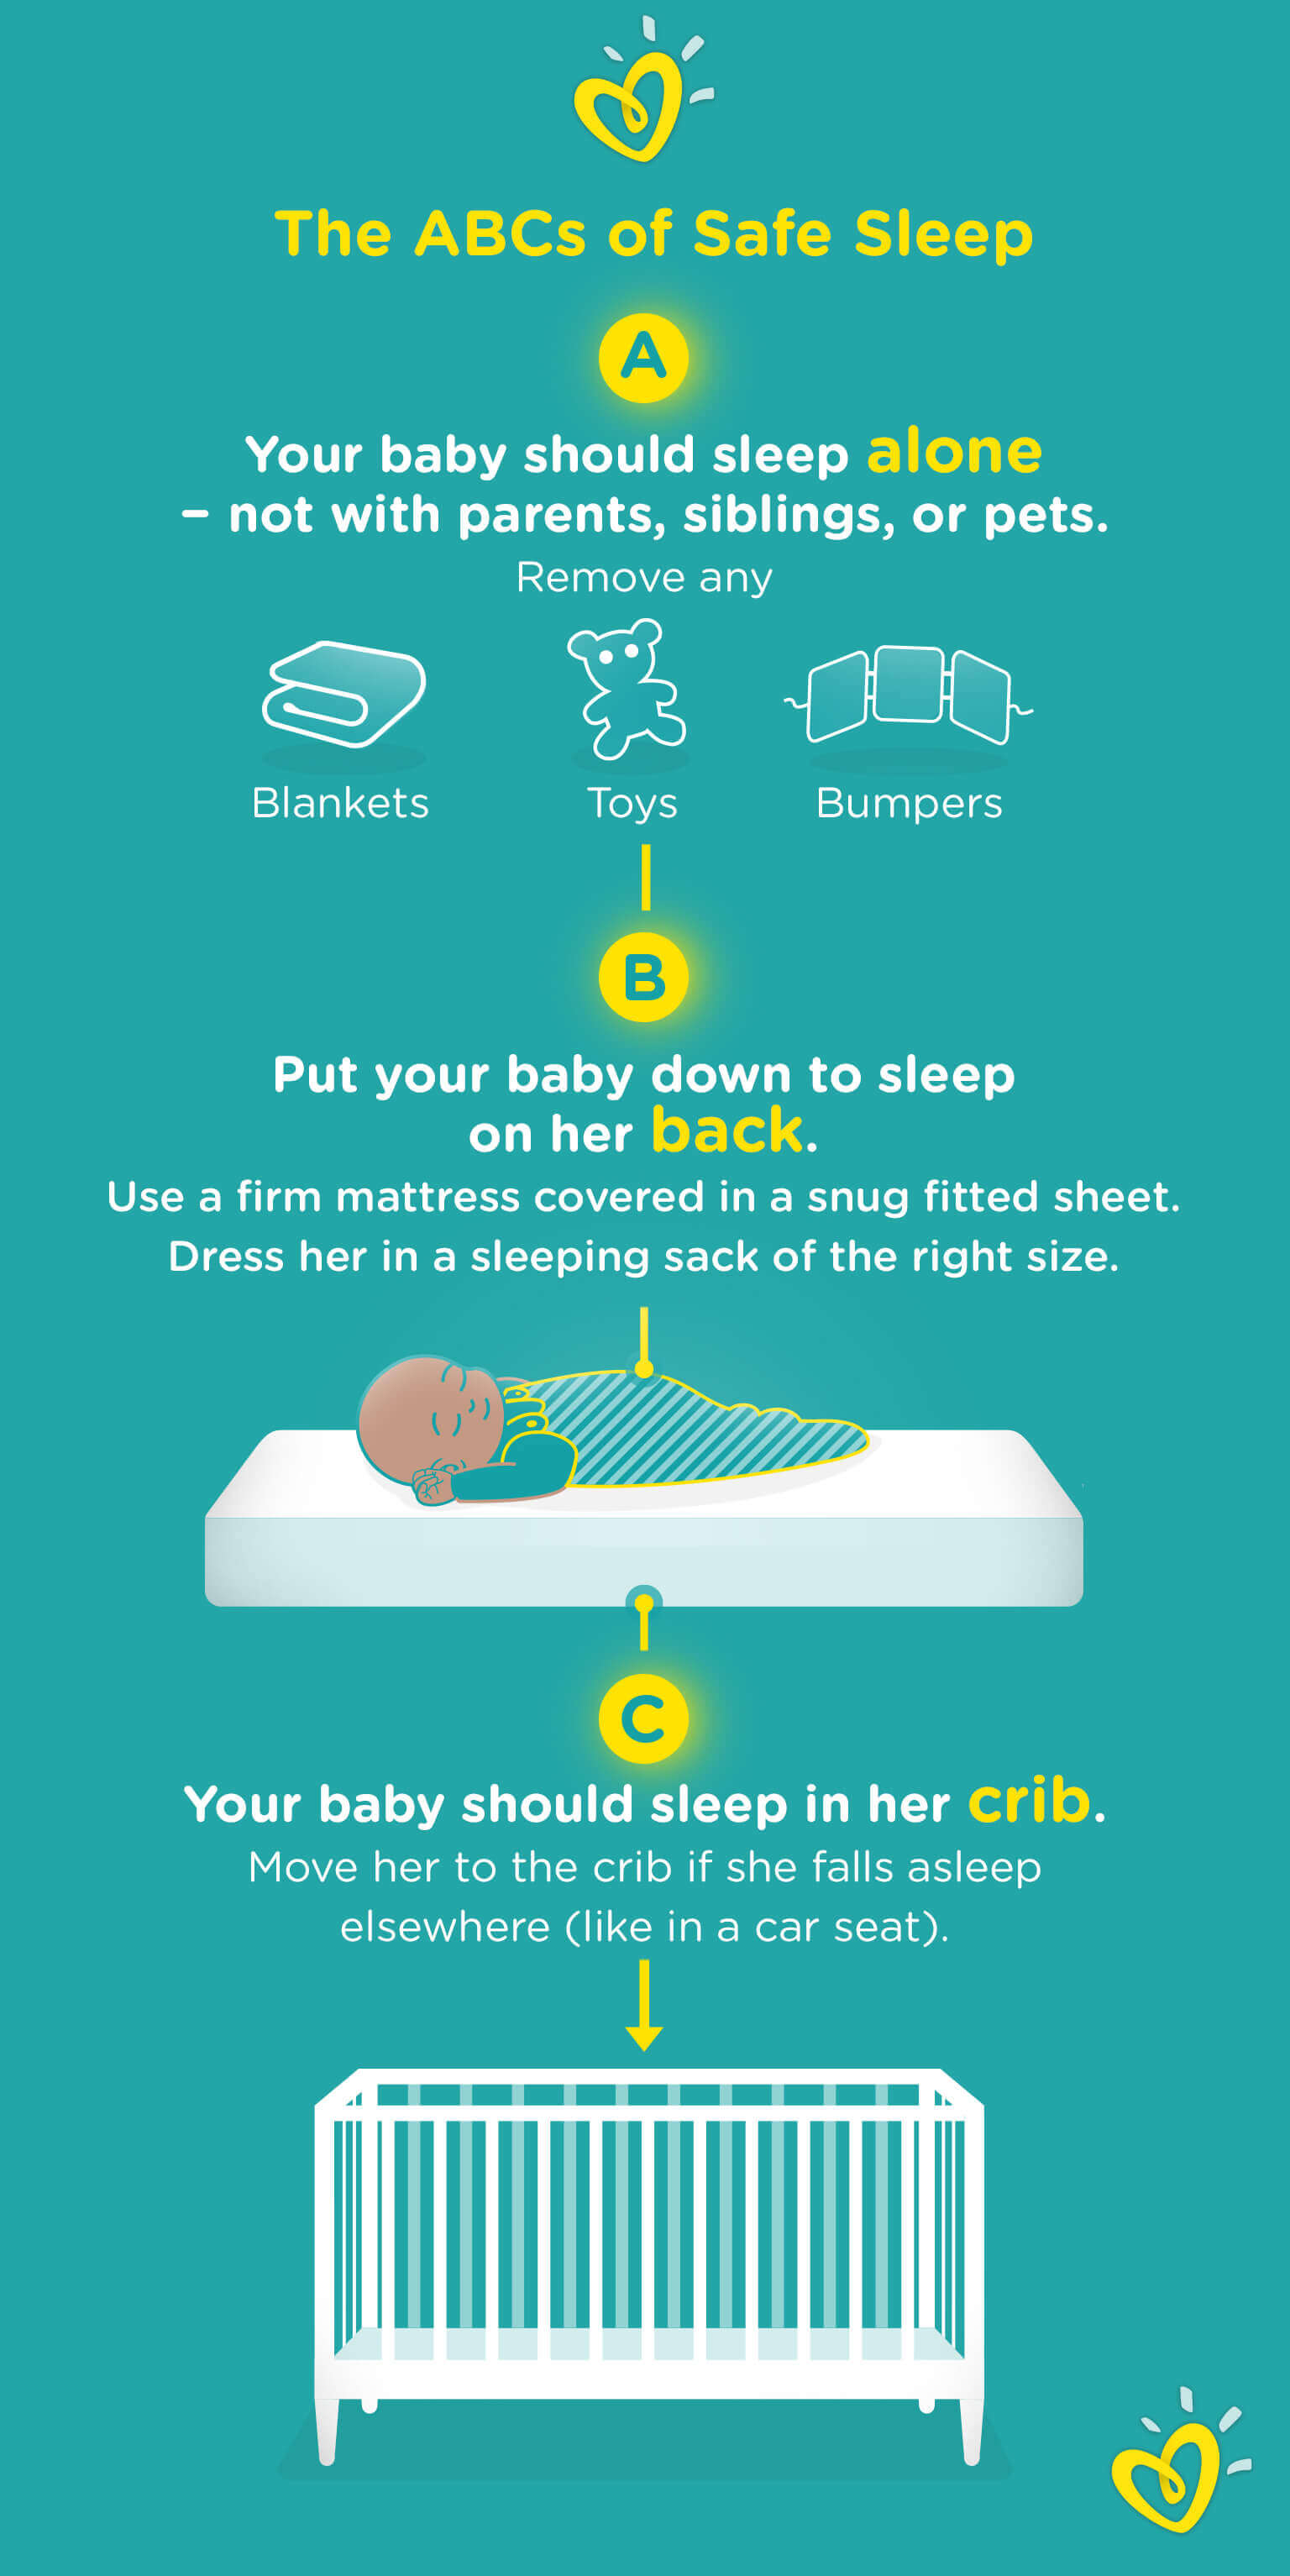 research on sids shows that babies should be